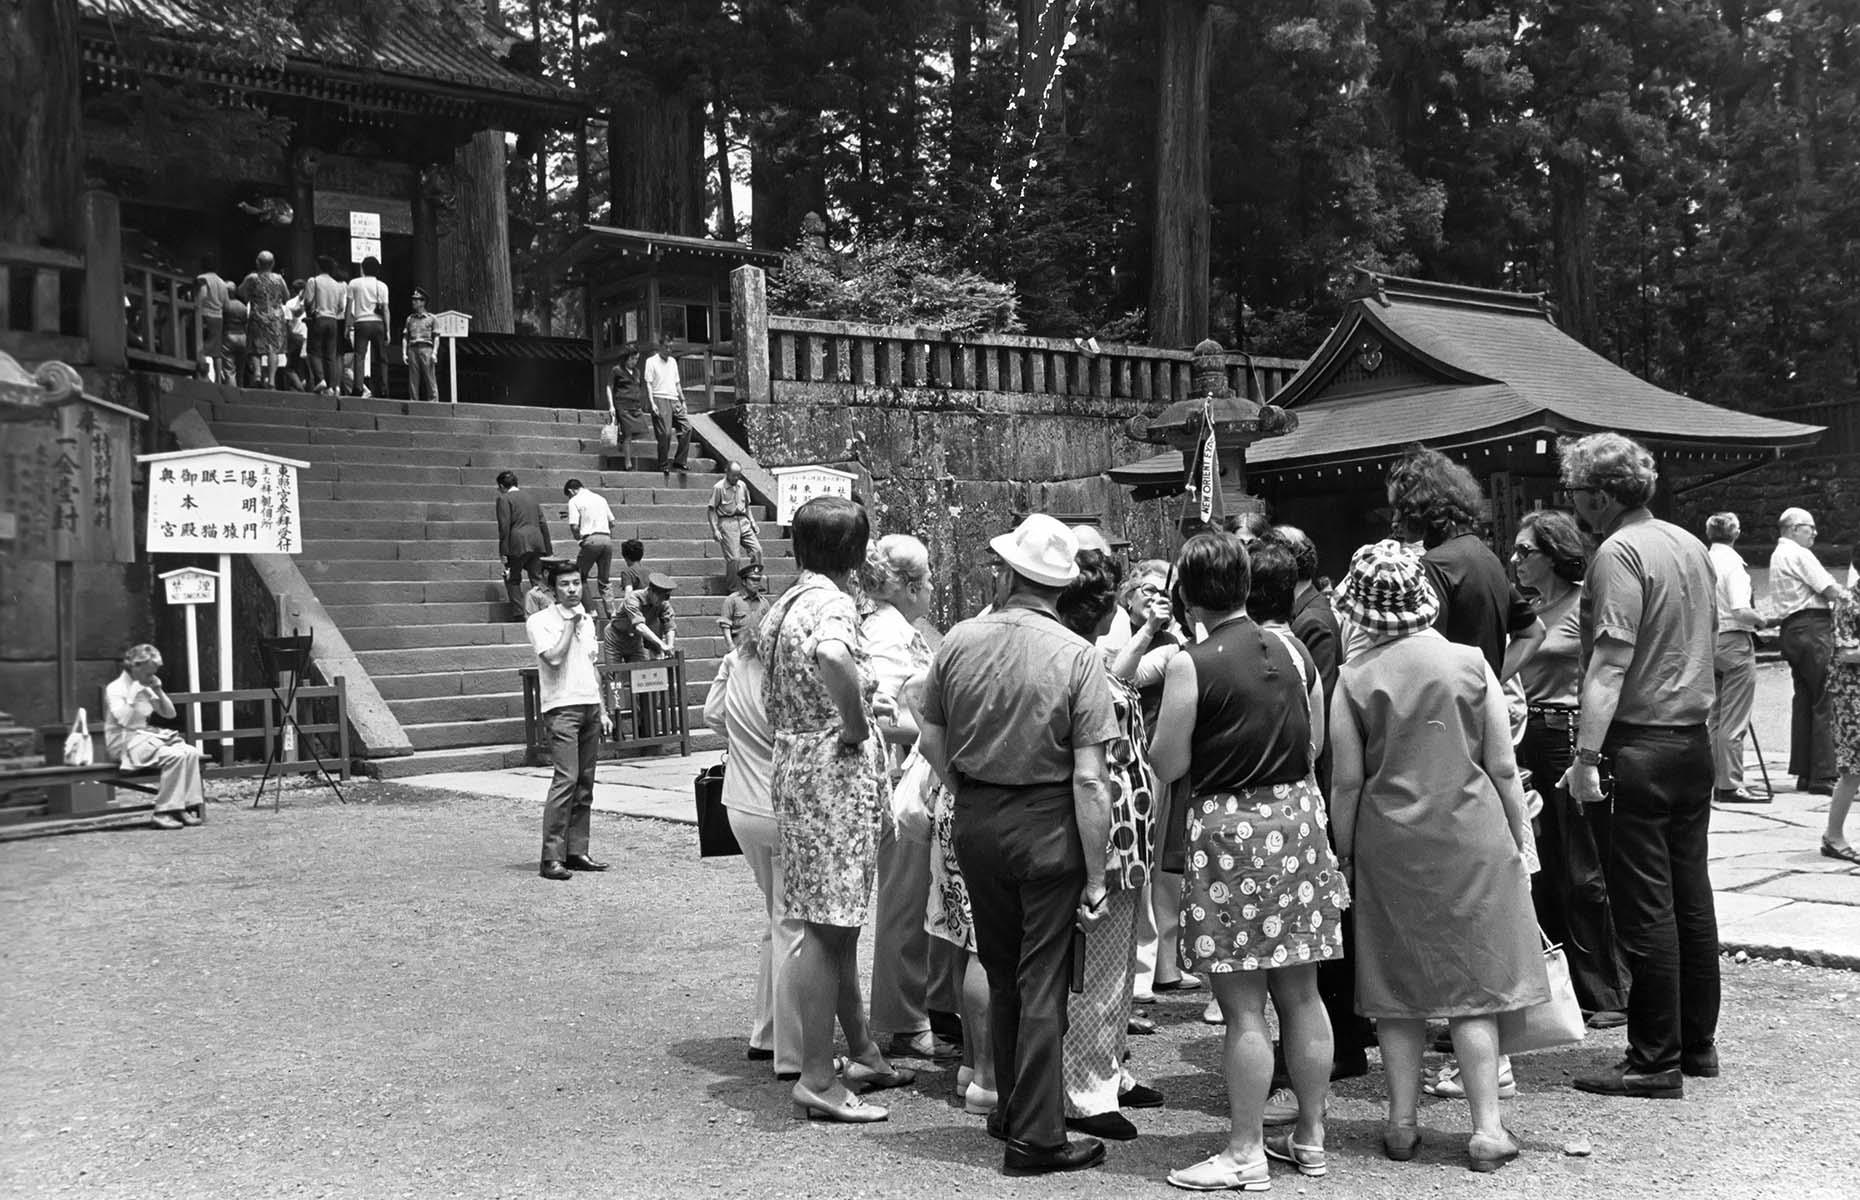 <p>In the decades following the Second World War, Western interest in Japan only increased and by the 1970s the memories of the conflict had faded. Tour groups and individual travelers from European countries and the US traveled to Japan in large numbers, keen to see this fascinating country and learn about its history. In this captivating shot from 1974, that could easily be mistaken for a tour group today with the guide's flag raised in the air, American tourists have gathered to tour Nikko National Park.</p>